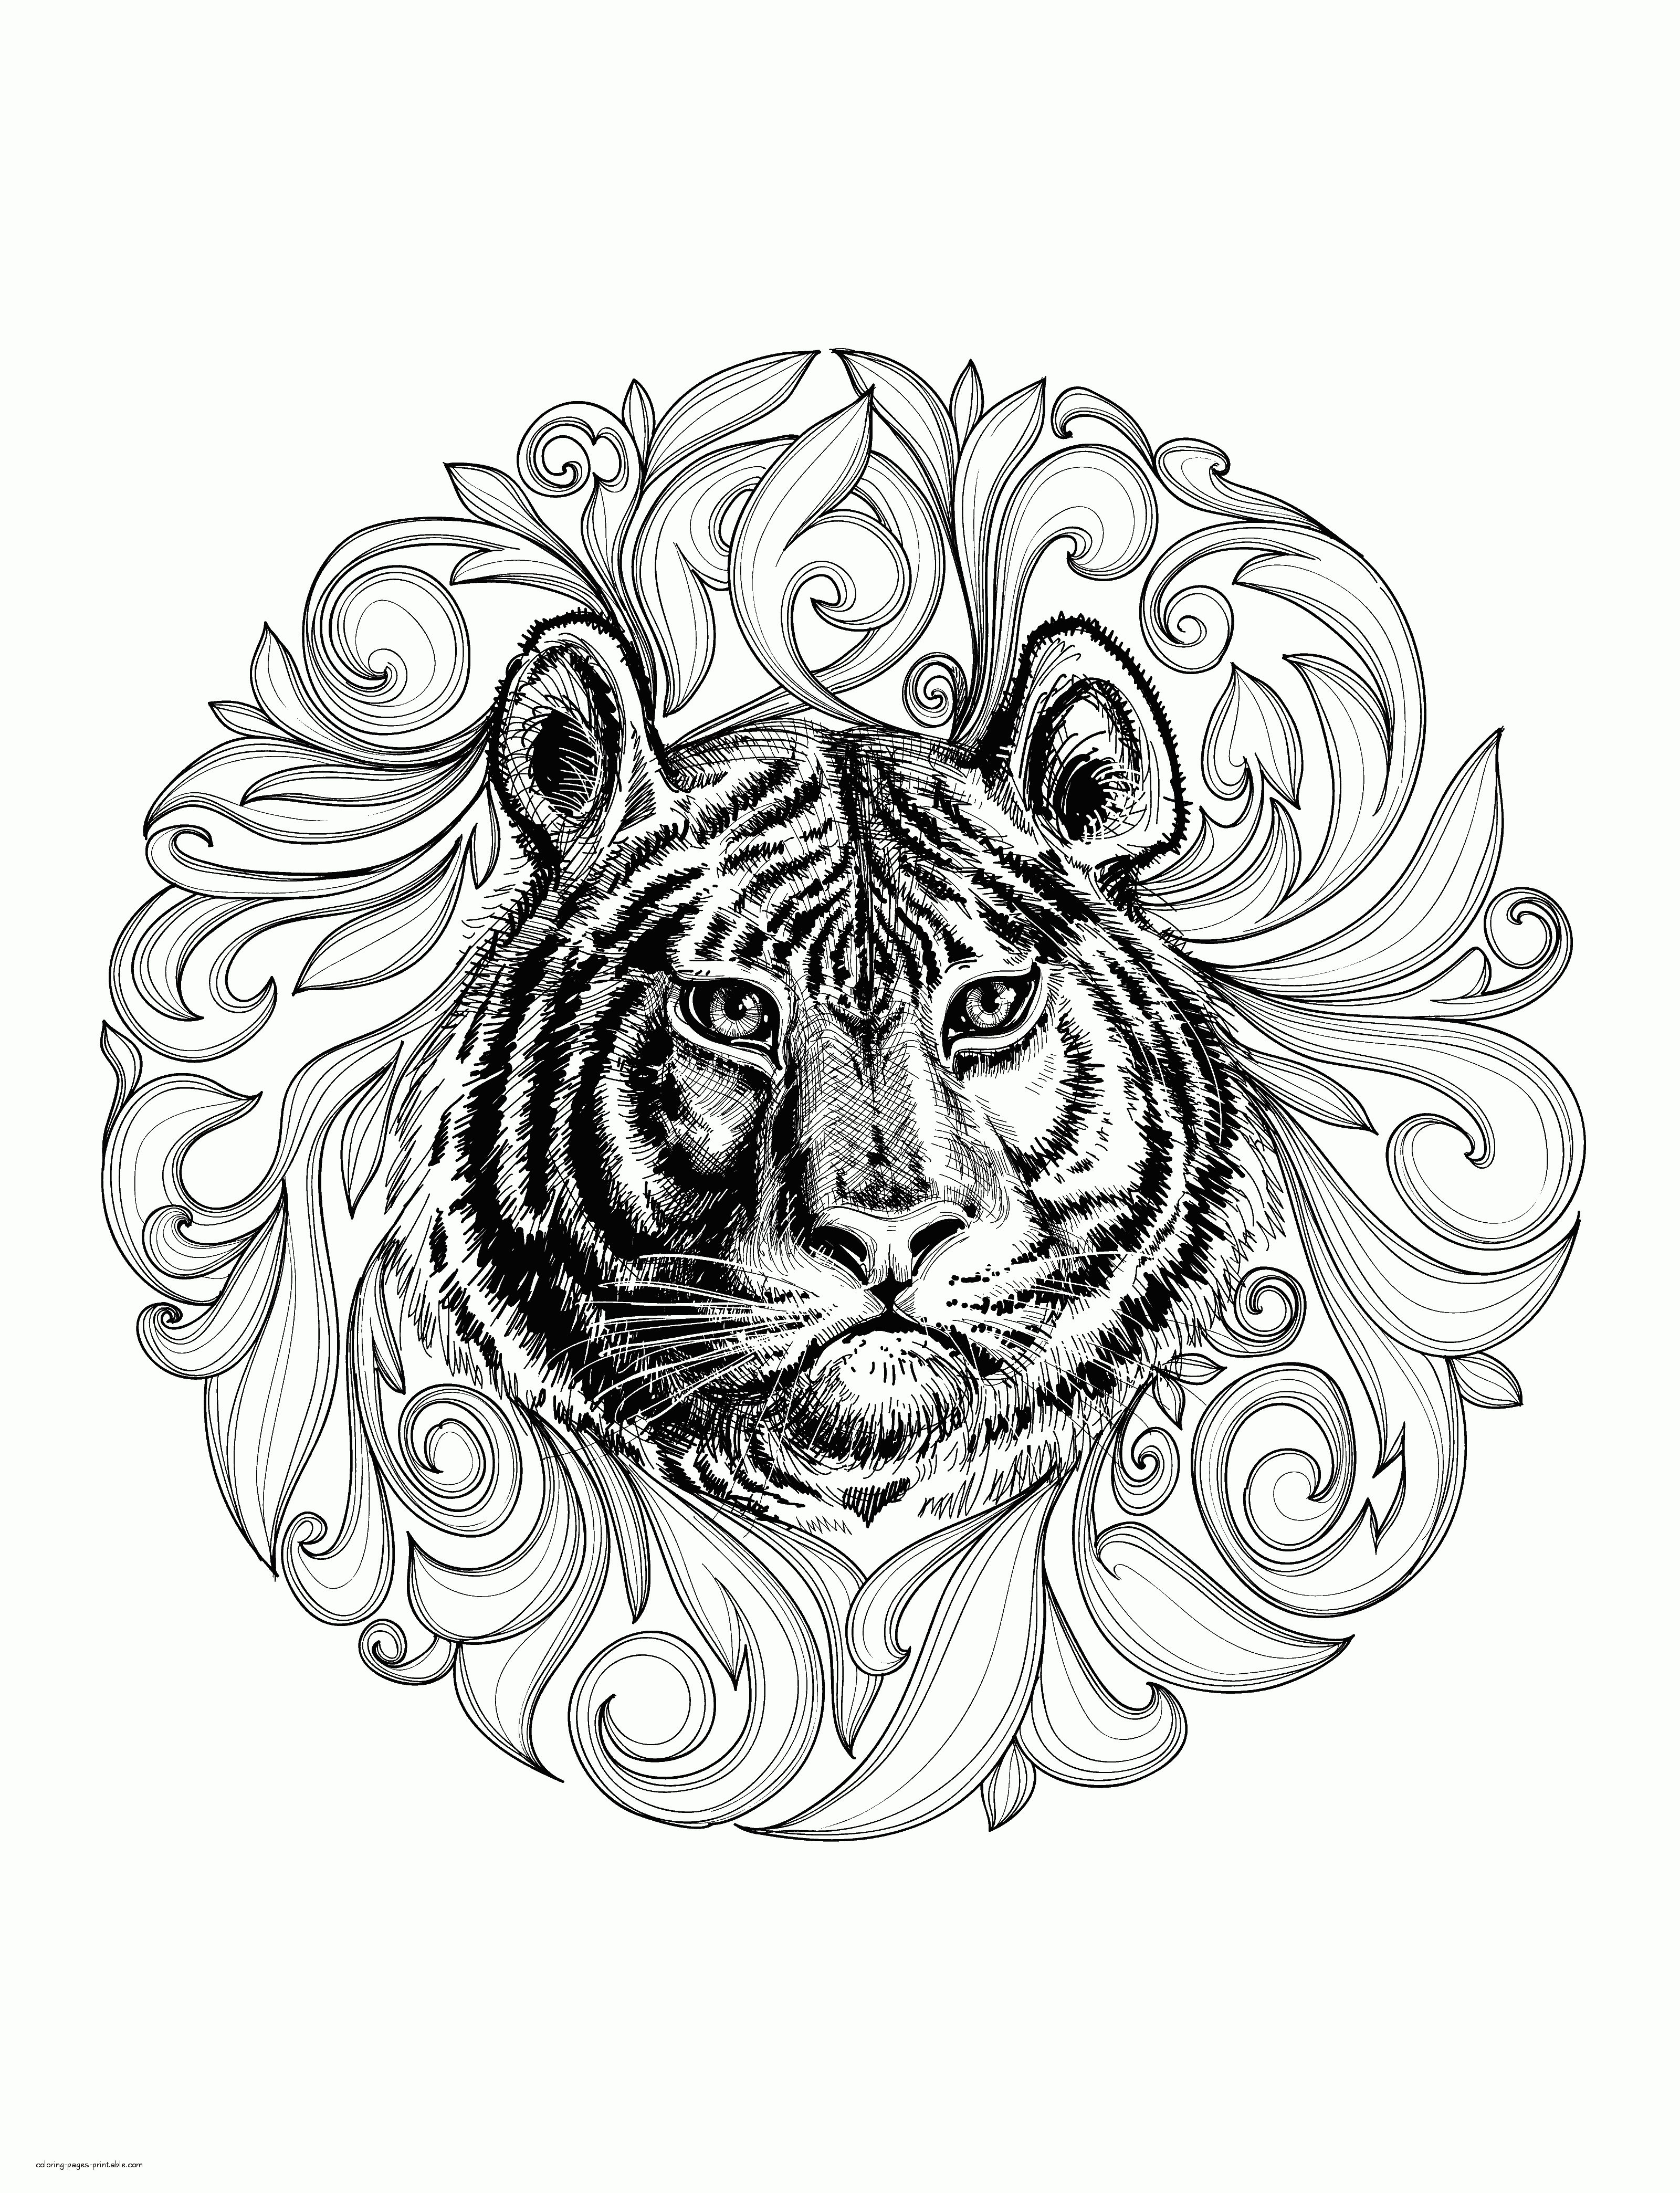 Animal Coloring Pages For Adults. Realistic Tiger    COLORING ...